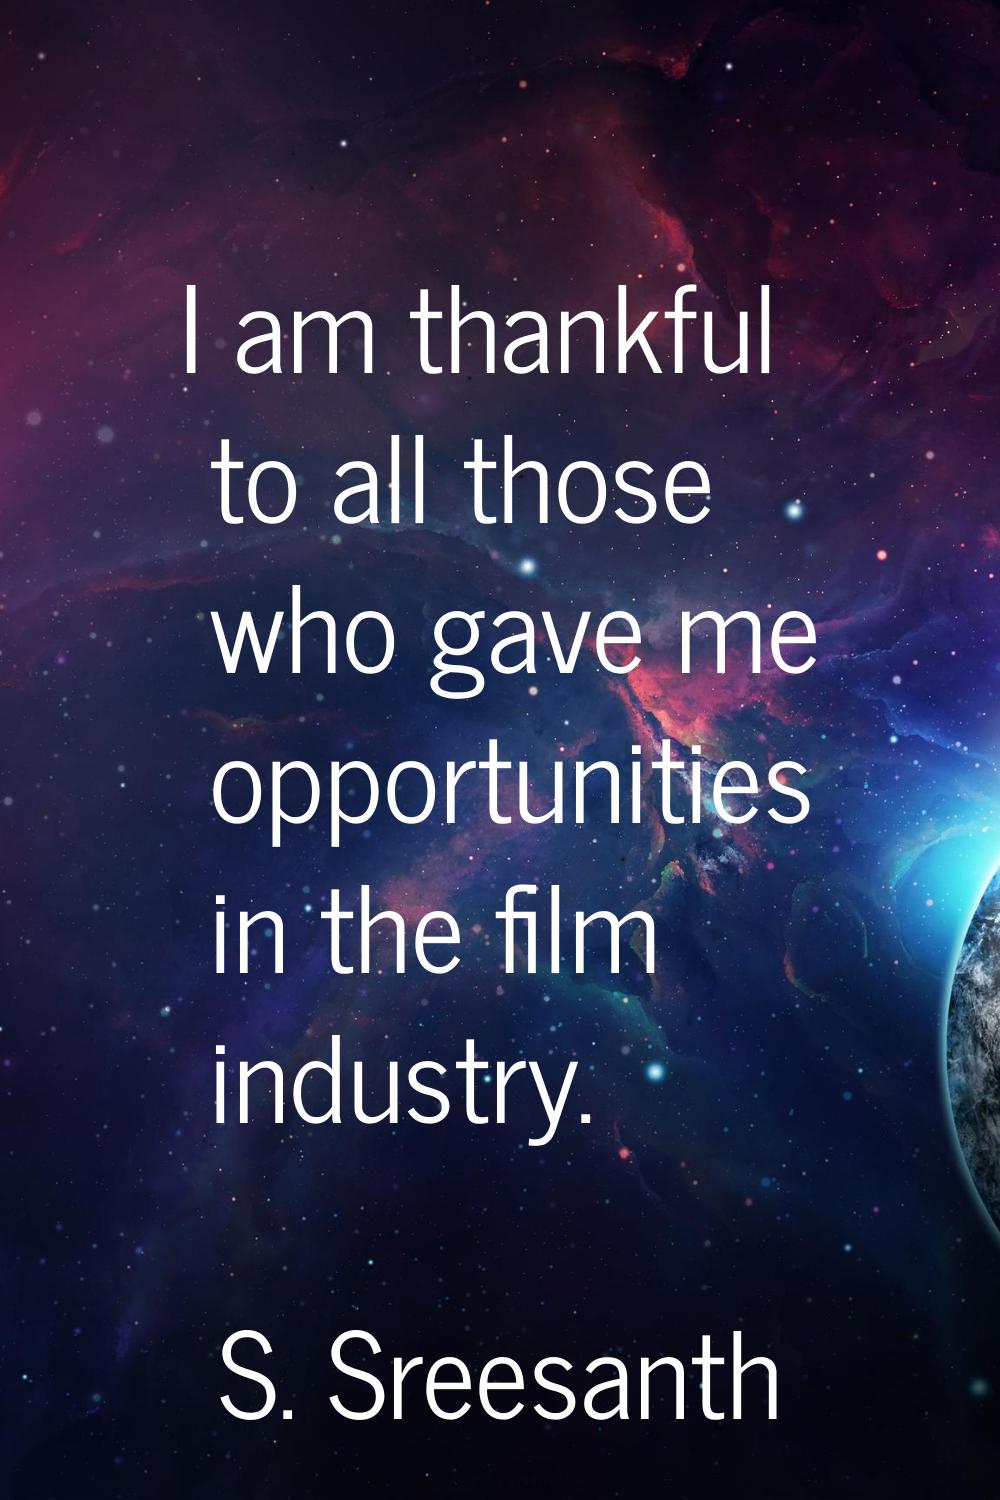 I am thankful to all those who gave me opportunities in the film industry.